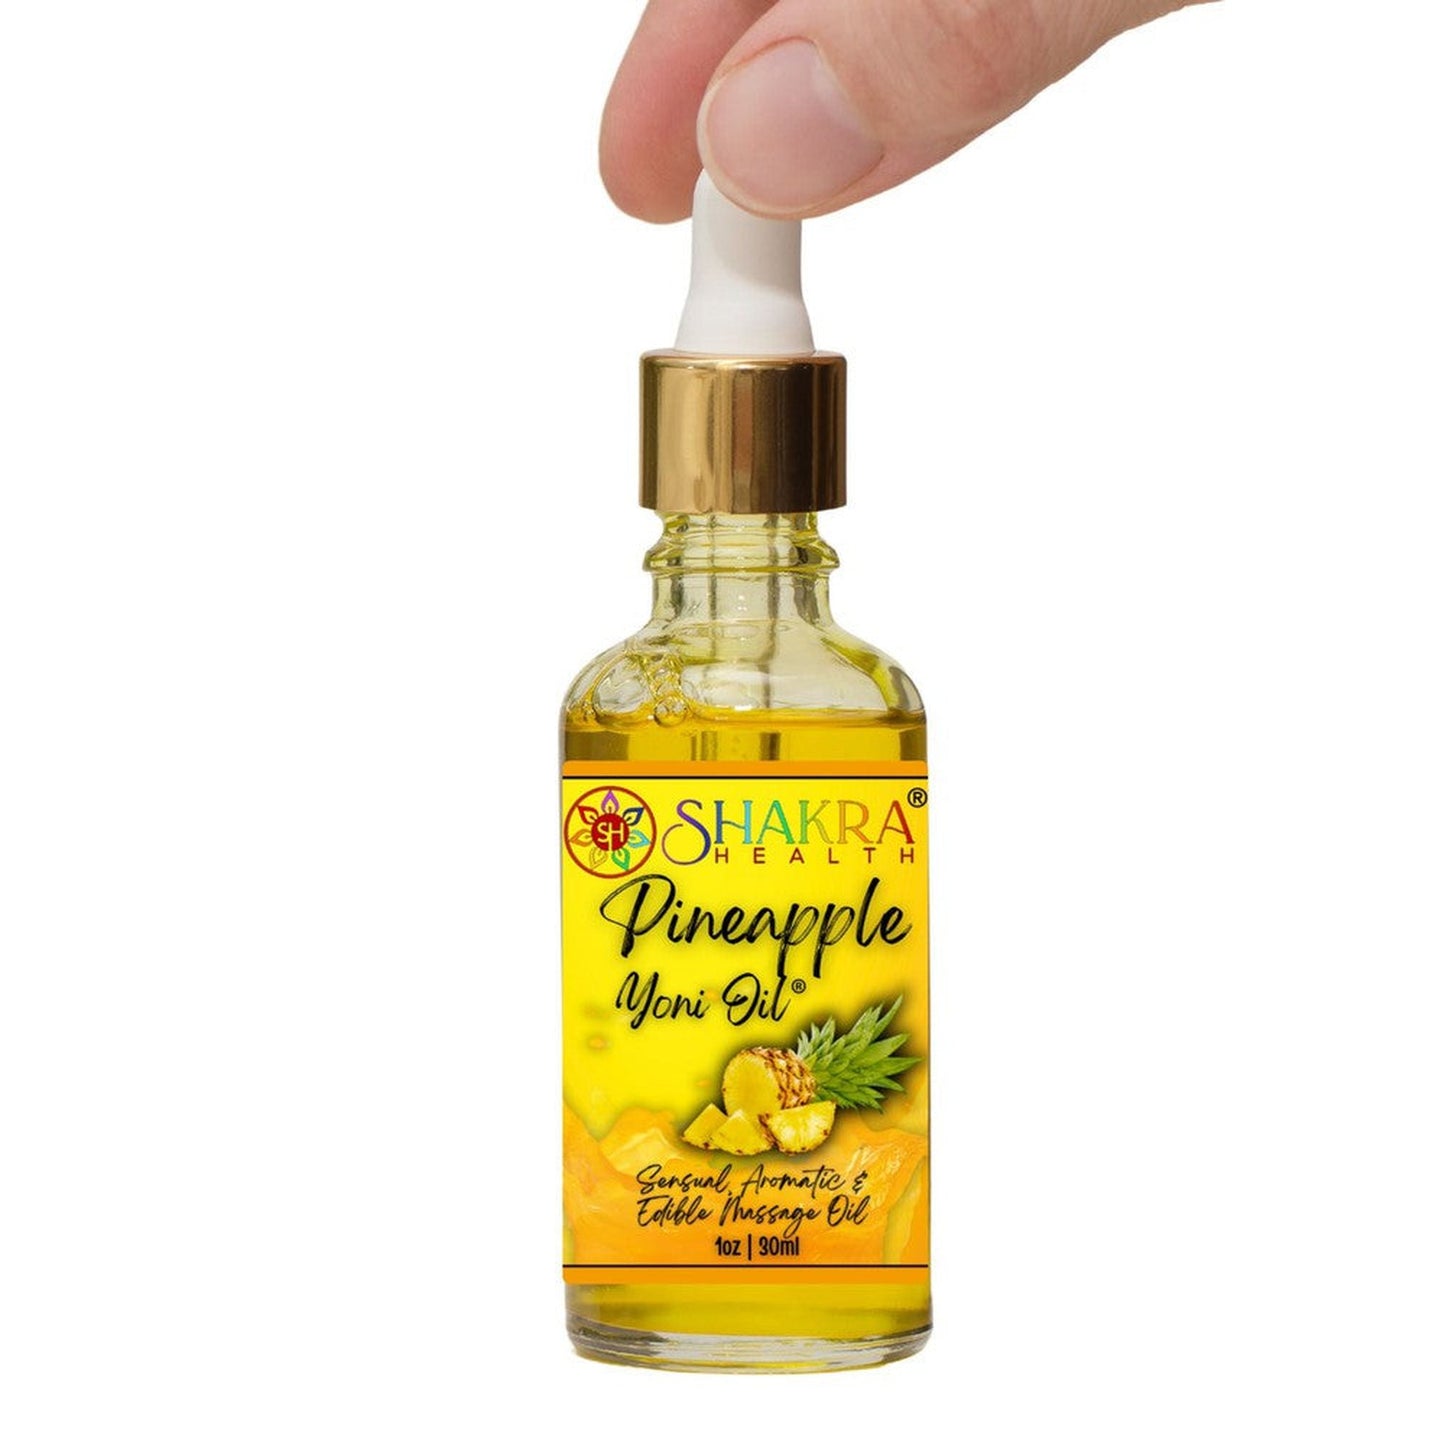 Buy Pineapple Flavoured Yoni Oil. Massage, Balance PH, Scent & Hygeine - Edible Yoni Oils for him, or her, not only taste & smell great, but make egg insertion a breeze & liven up your romantic moments. Get ready to feel confident & daring together (or alone!), with the perfect blend of oils designed to stimulate, soothe, nourish & revive dry / itchy skin. Let the blend work its magic & feel alive! at Sacred Remedy Online